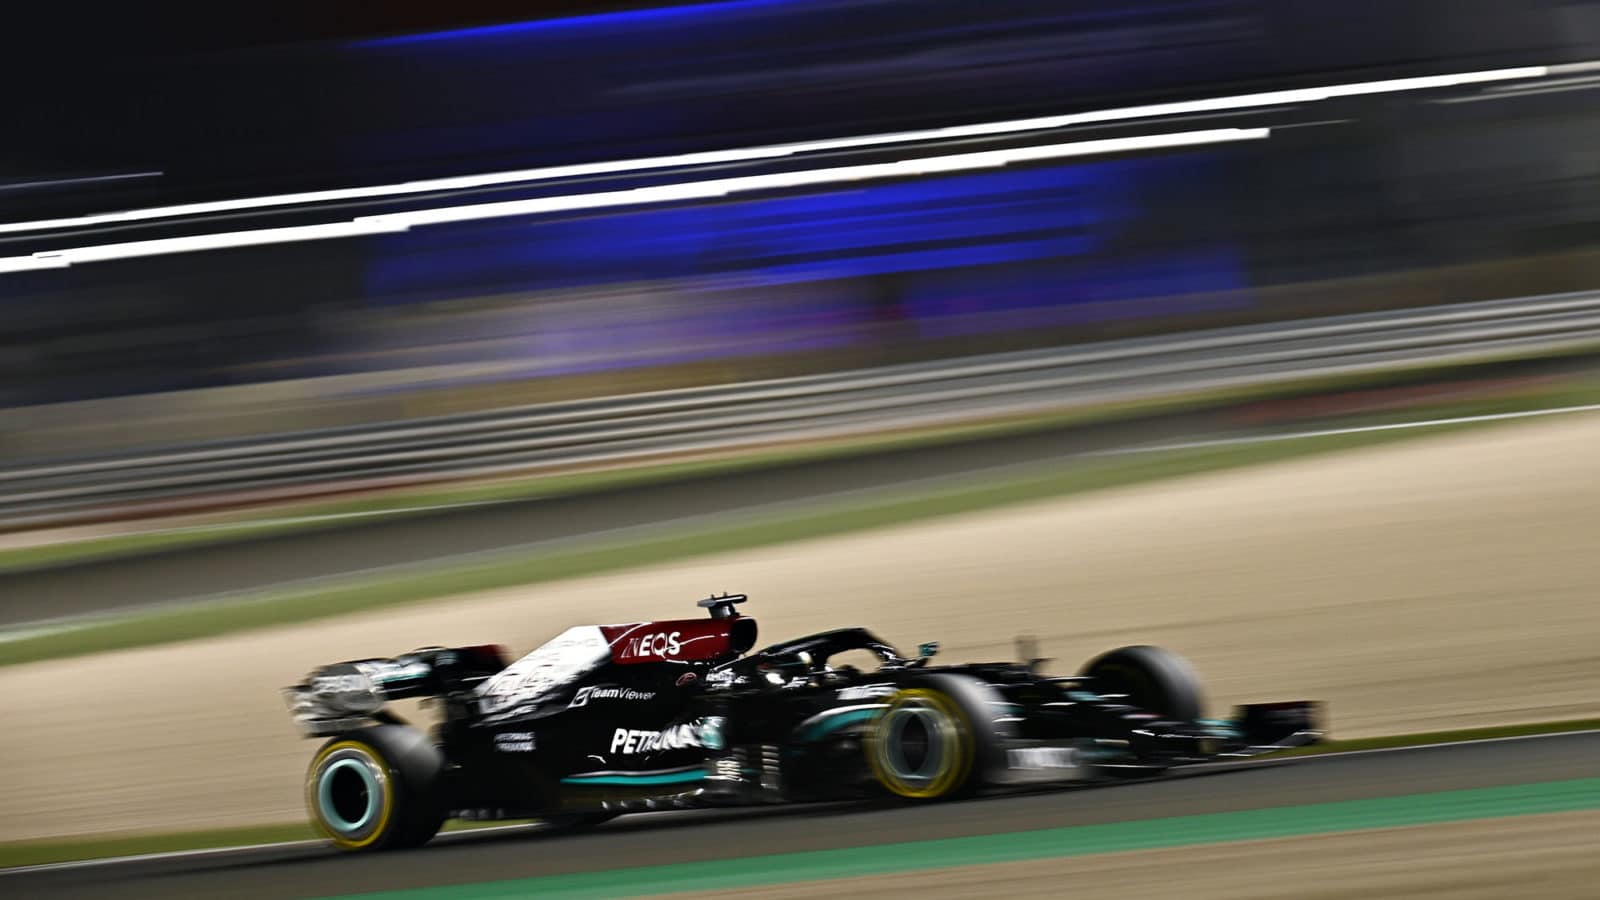 DOHA, QATAR - NOVEMBER 21: Lewis Hamilton of Great Britain driving the (44) Mercedes AMG Petronas F1 Team Mercedes W12 during the F1 Grand Prix of Qatar at Losail International Circuit on November 21, 2021 in Doha, Qatar. (Photo by Clive Mason/Getty Images)